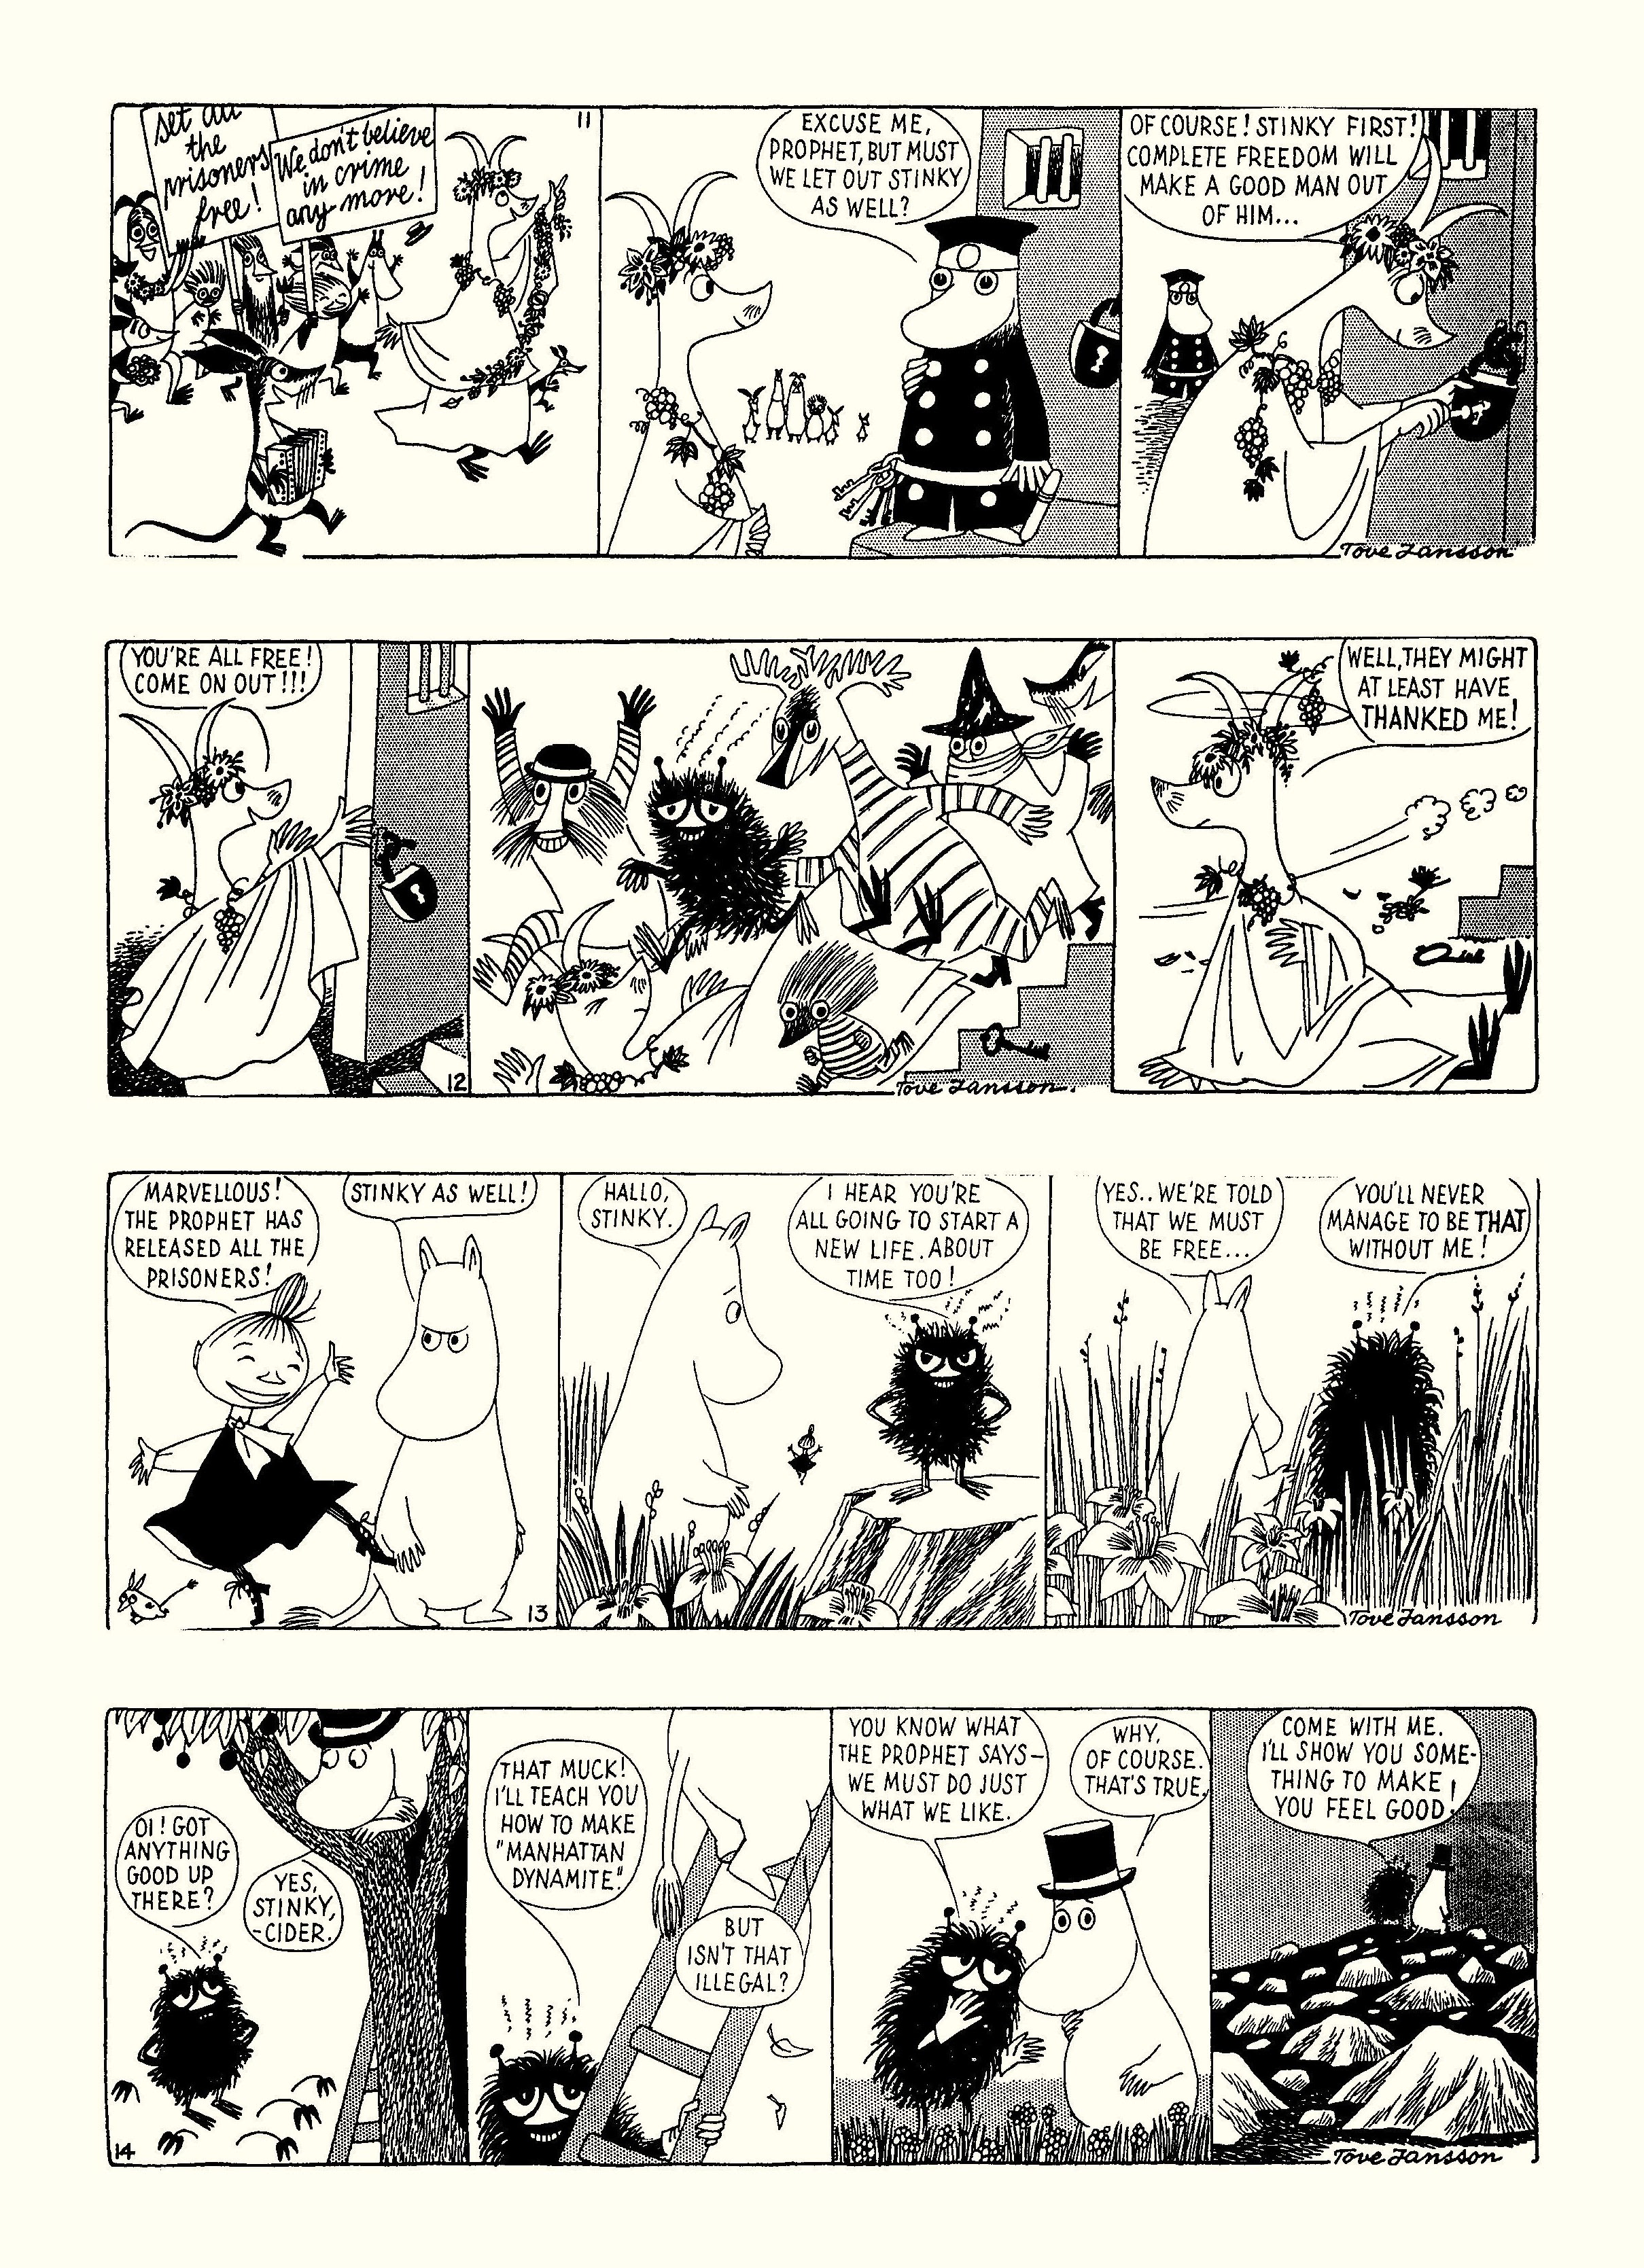 Read online Moomin: The Complete Tove Jansson Comic Strip comic -  Issue # TPB 2 - 67